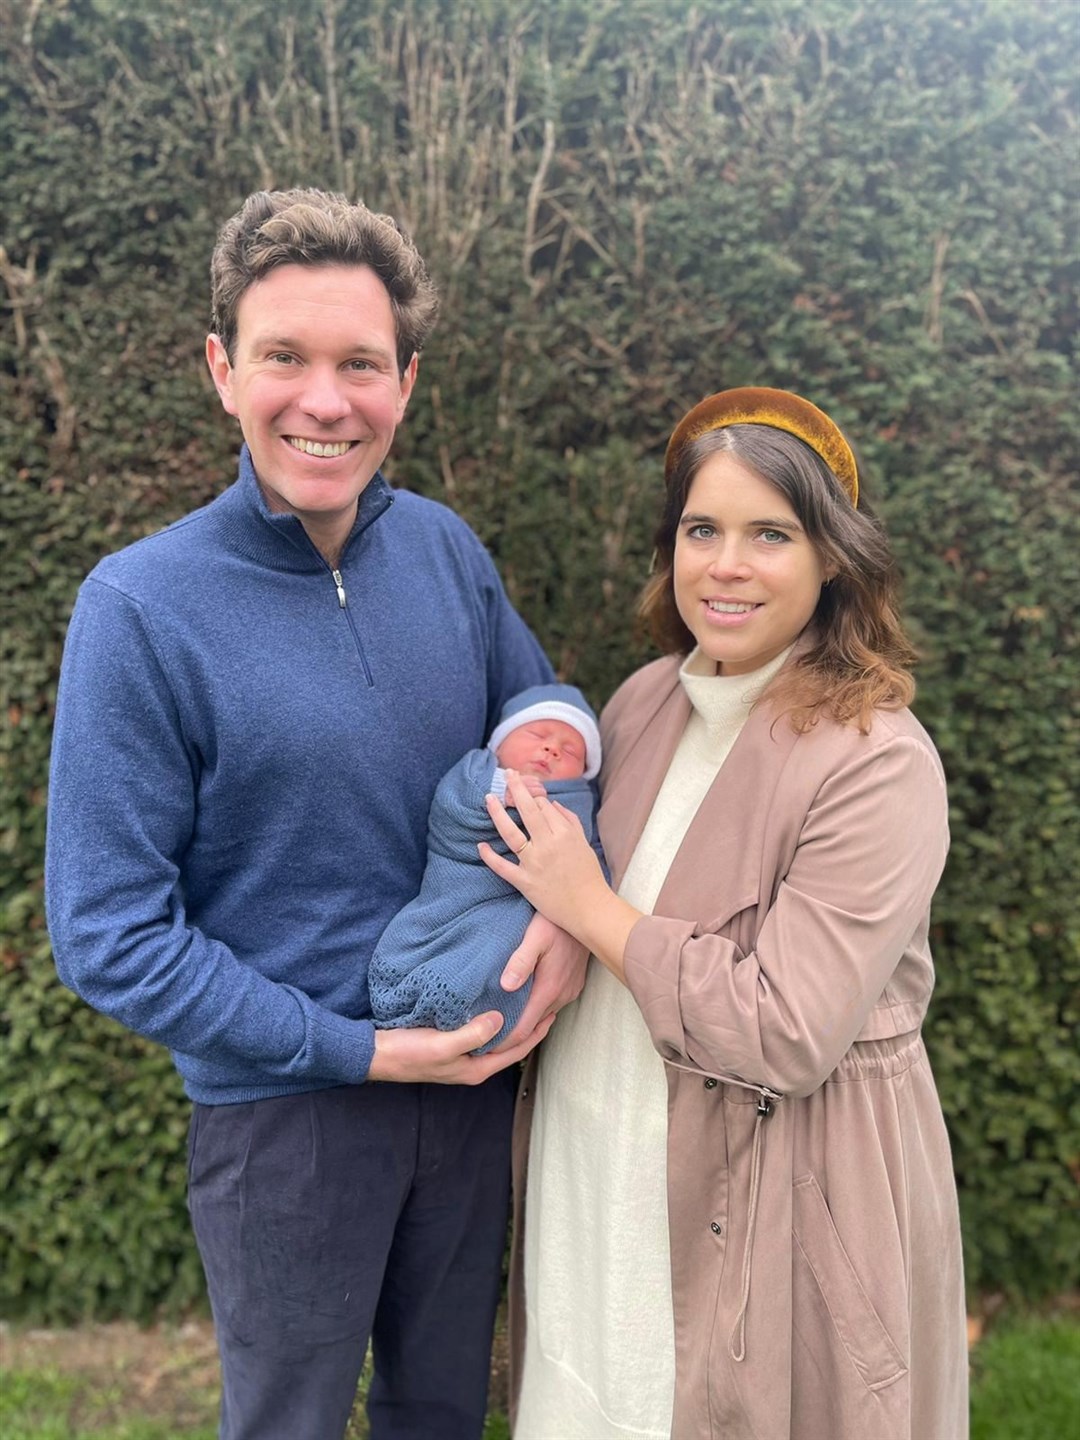 Princess Eugenie and Jack Brooksbank and their baby son August (Princess Eugenie and Jack Brooksbank/PA)